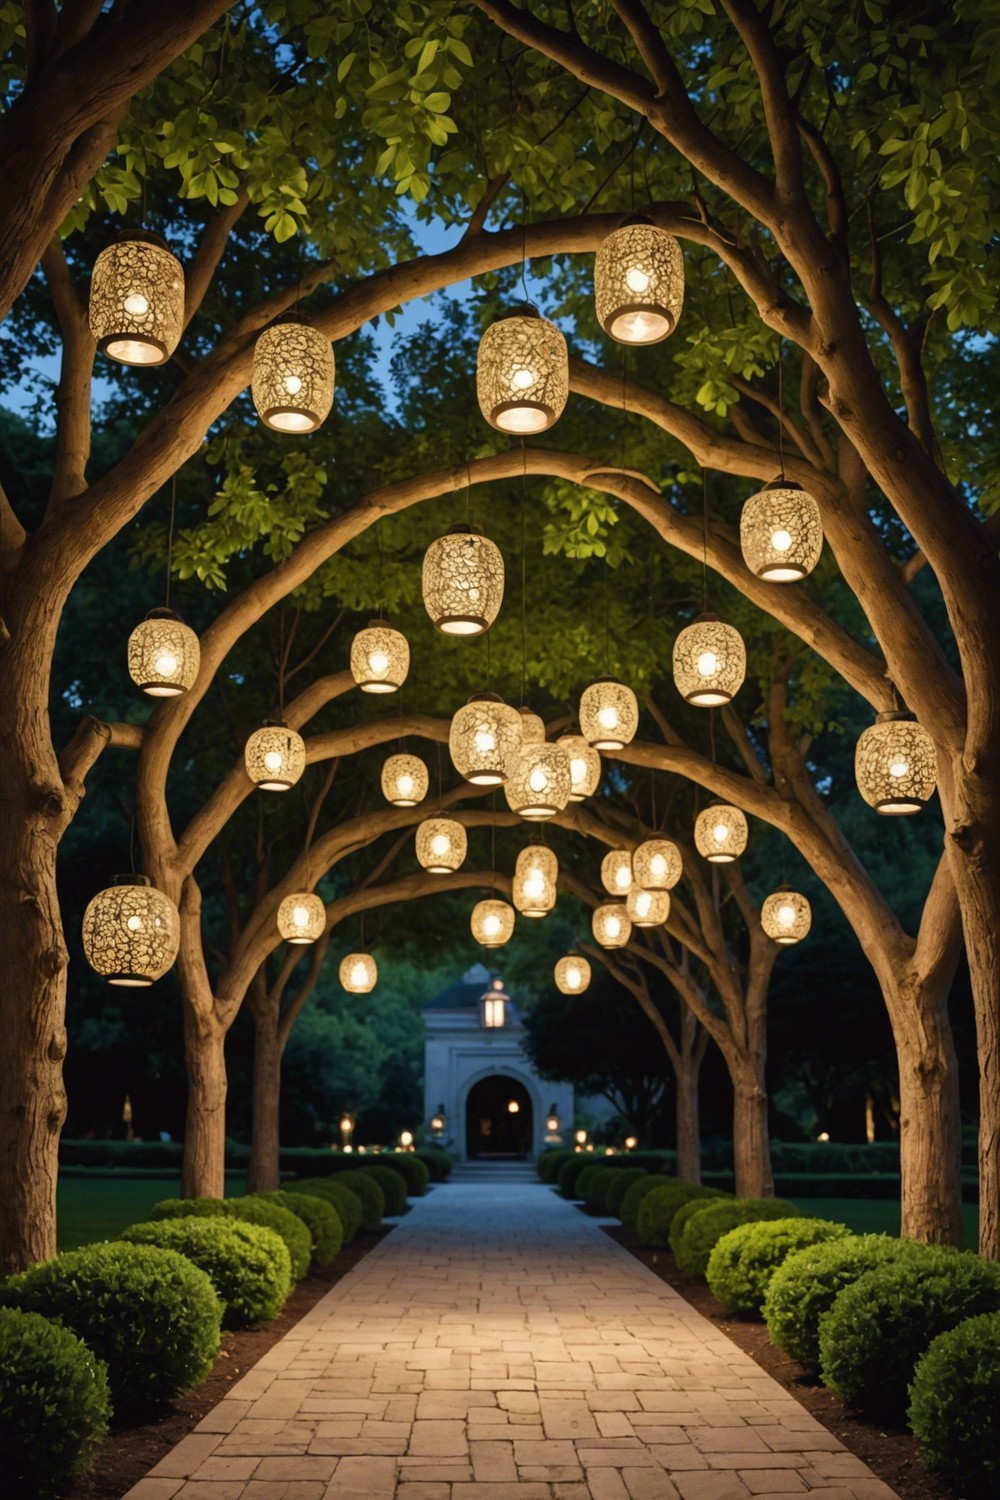 Outdoor Foyer with Hanging Lanterns in a Circular Pattern